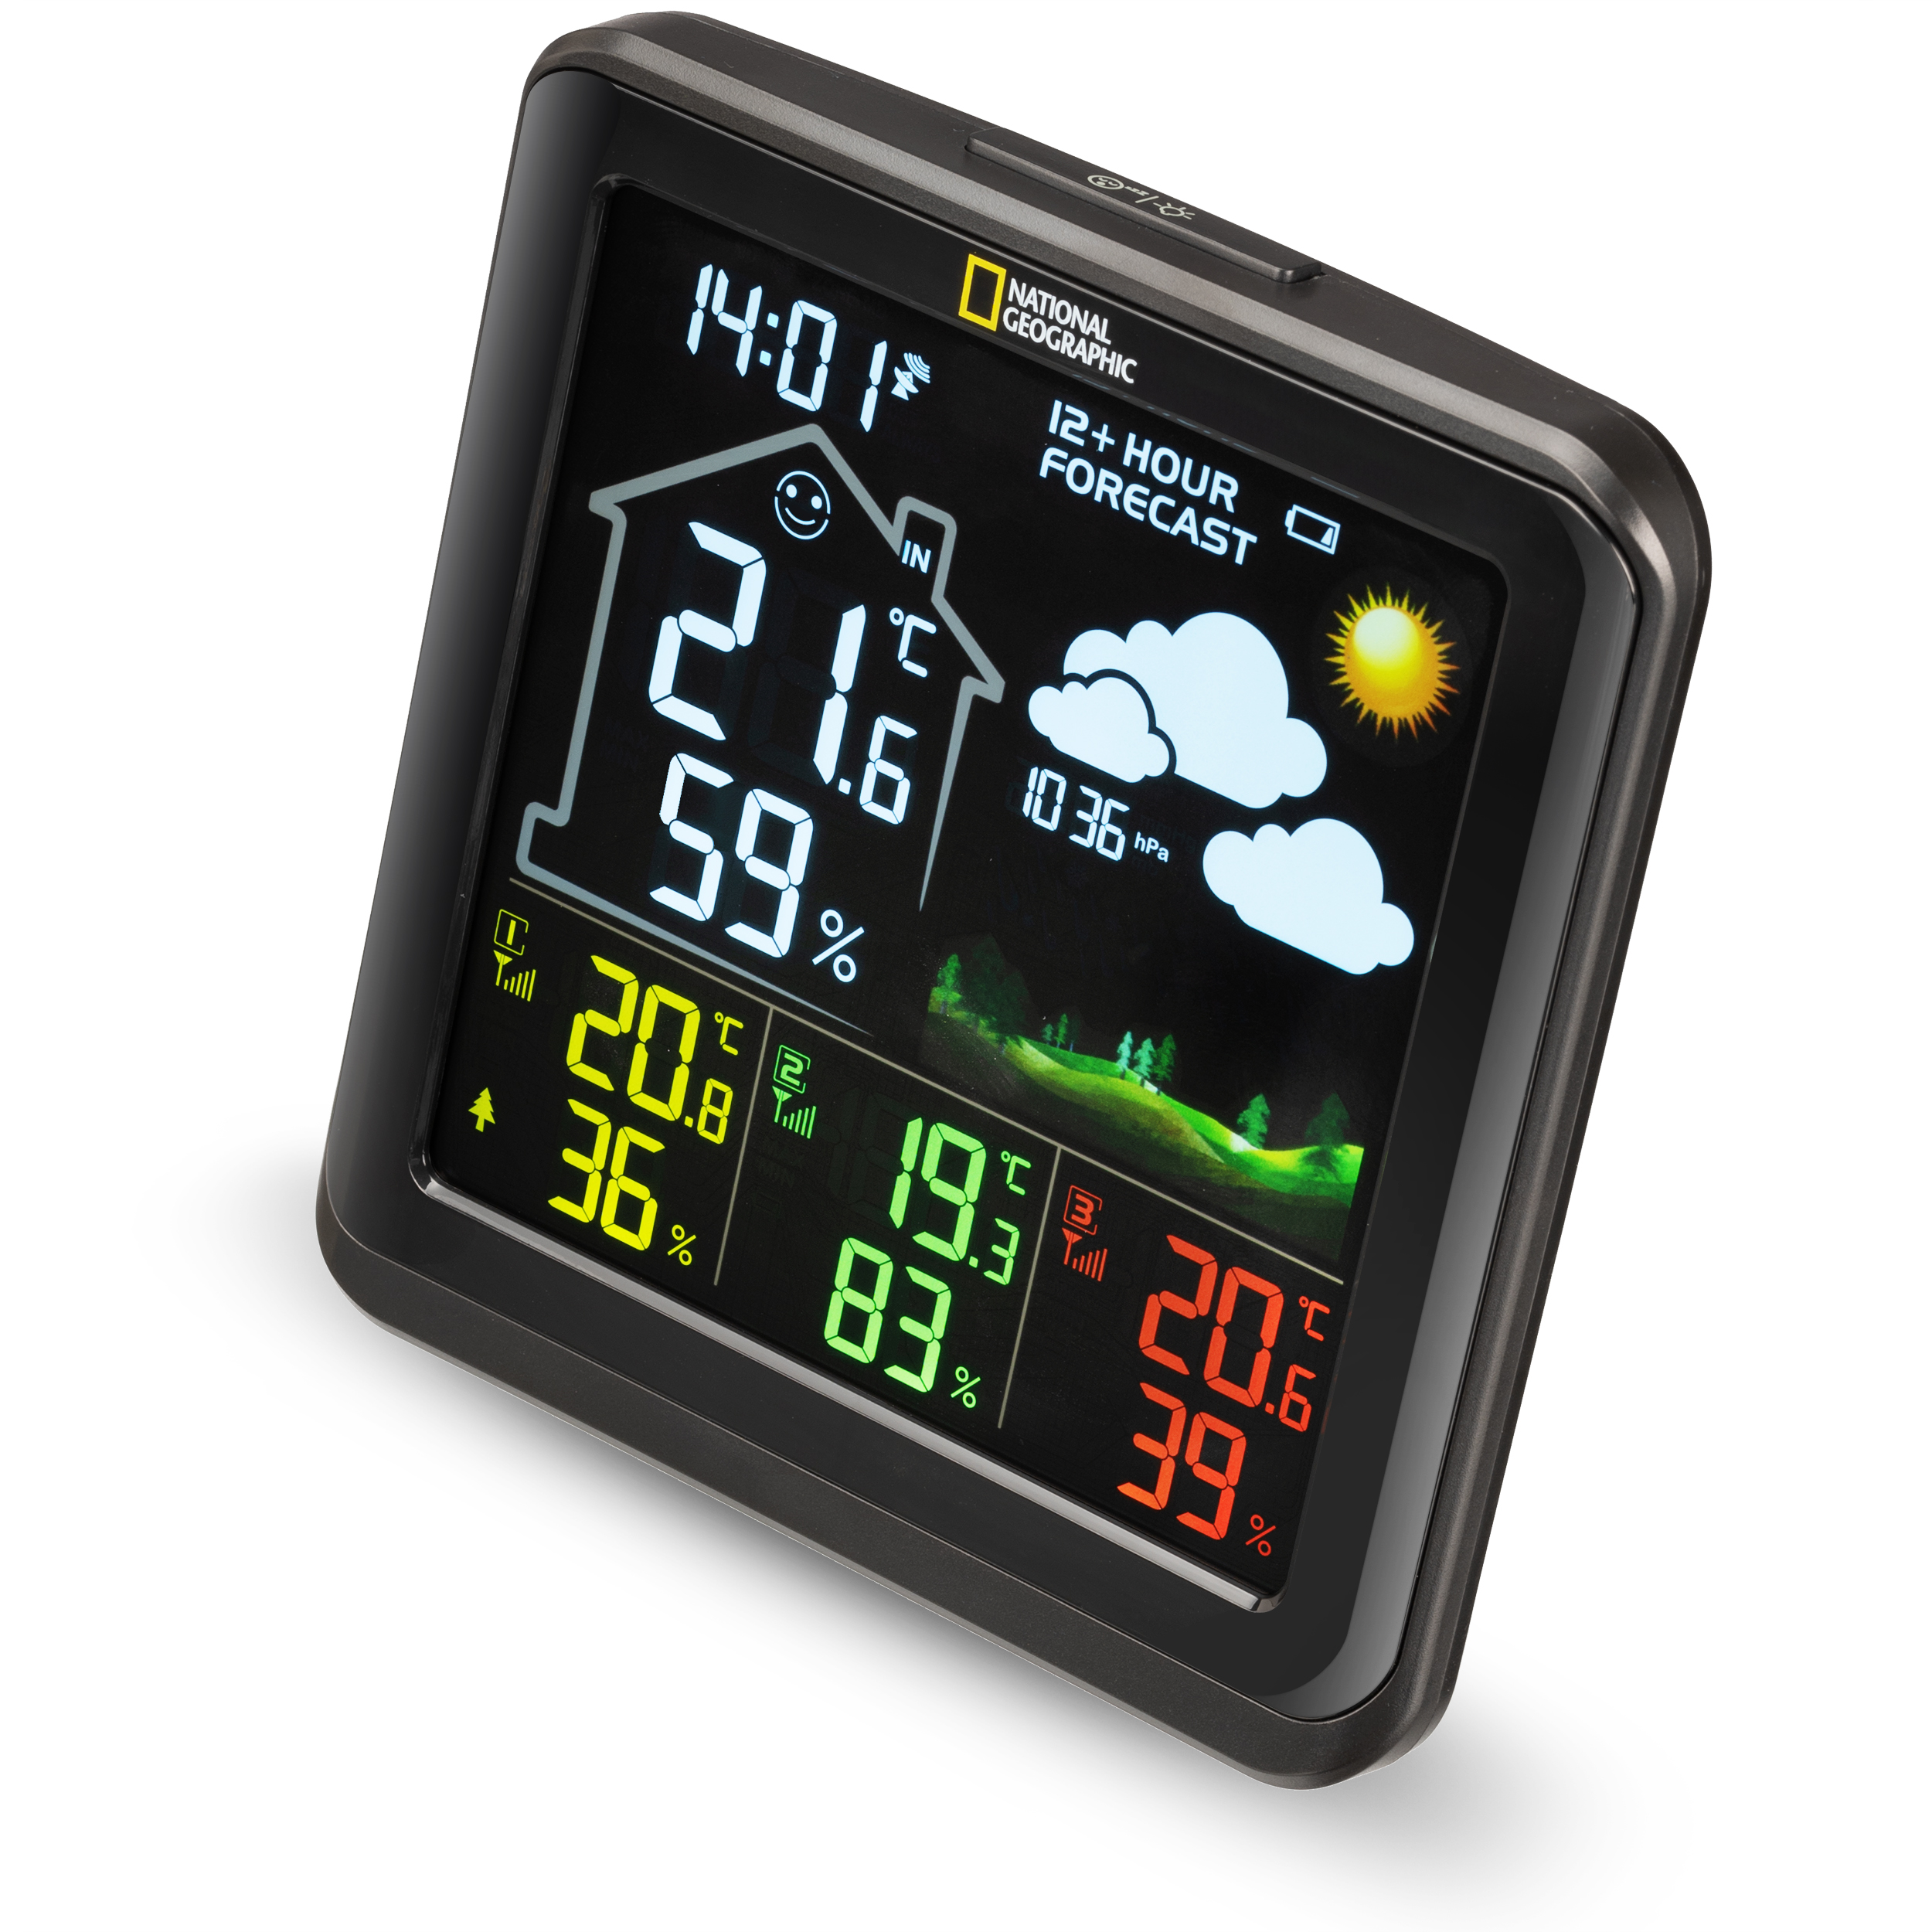 NATIONAL GEOGRAPHIC VA colour LCD Weather Station incl. 3 Sensors